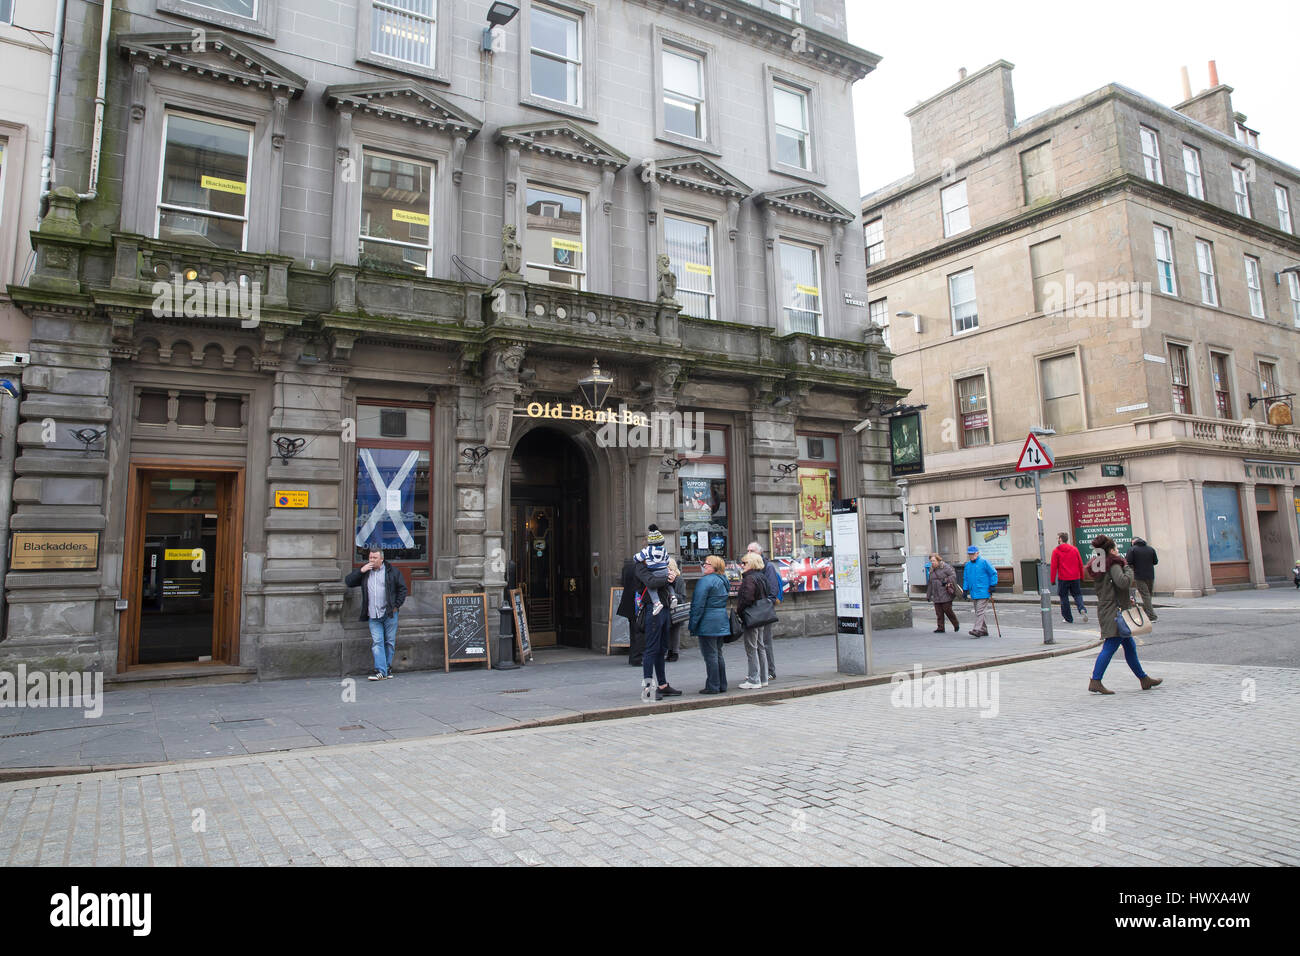 Old Bank Bar in Dundee Scotland Stock Photo - Alamy